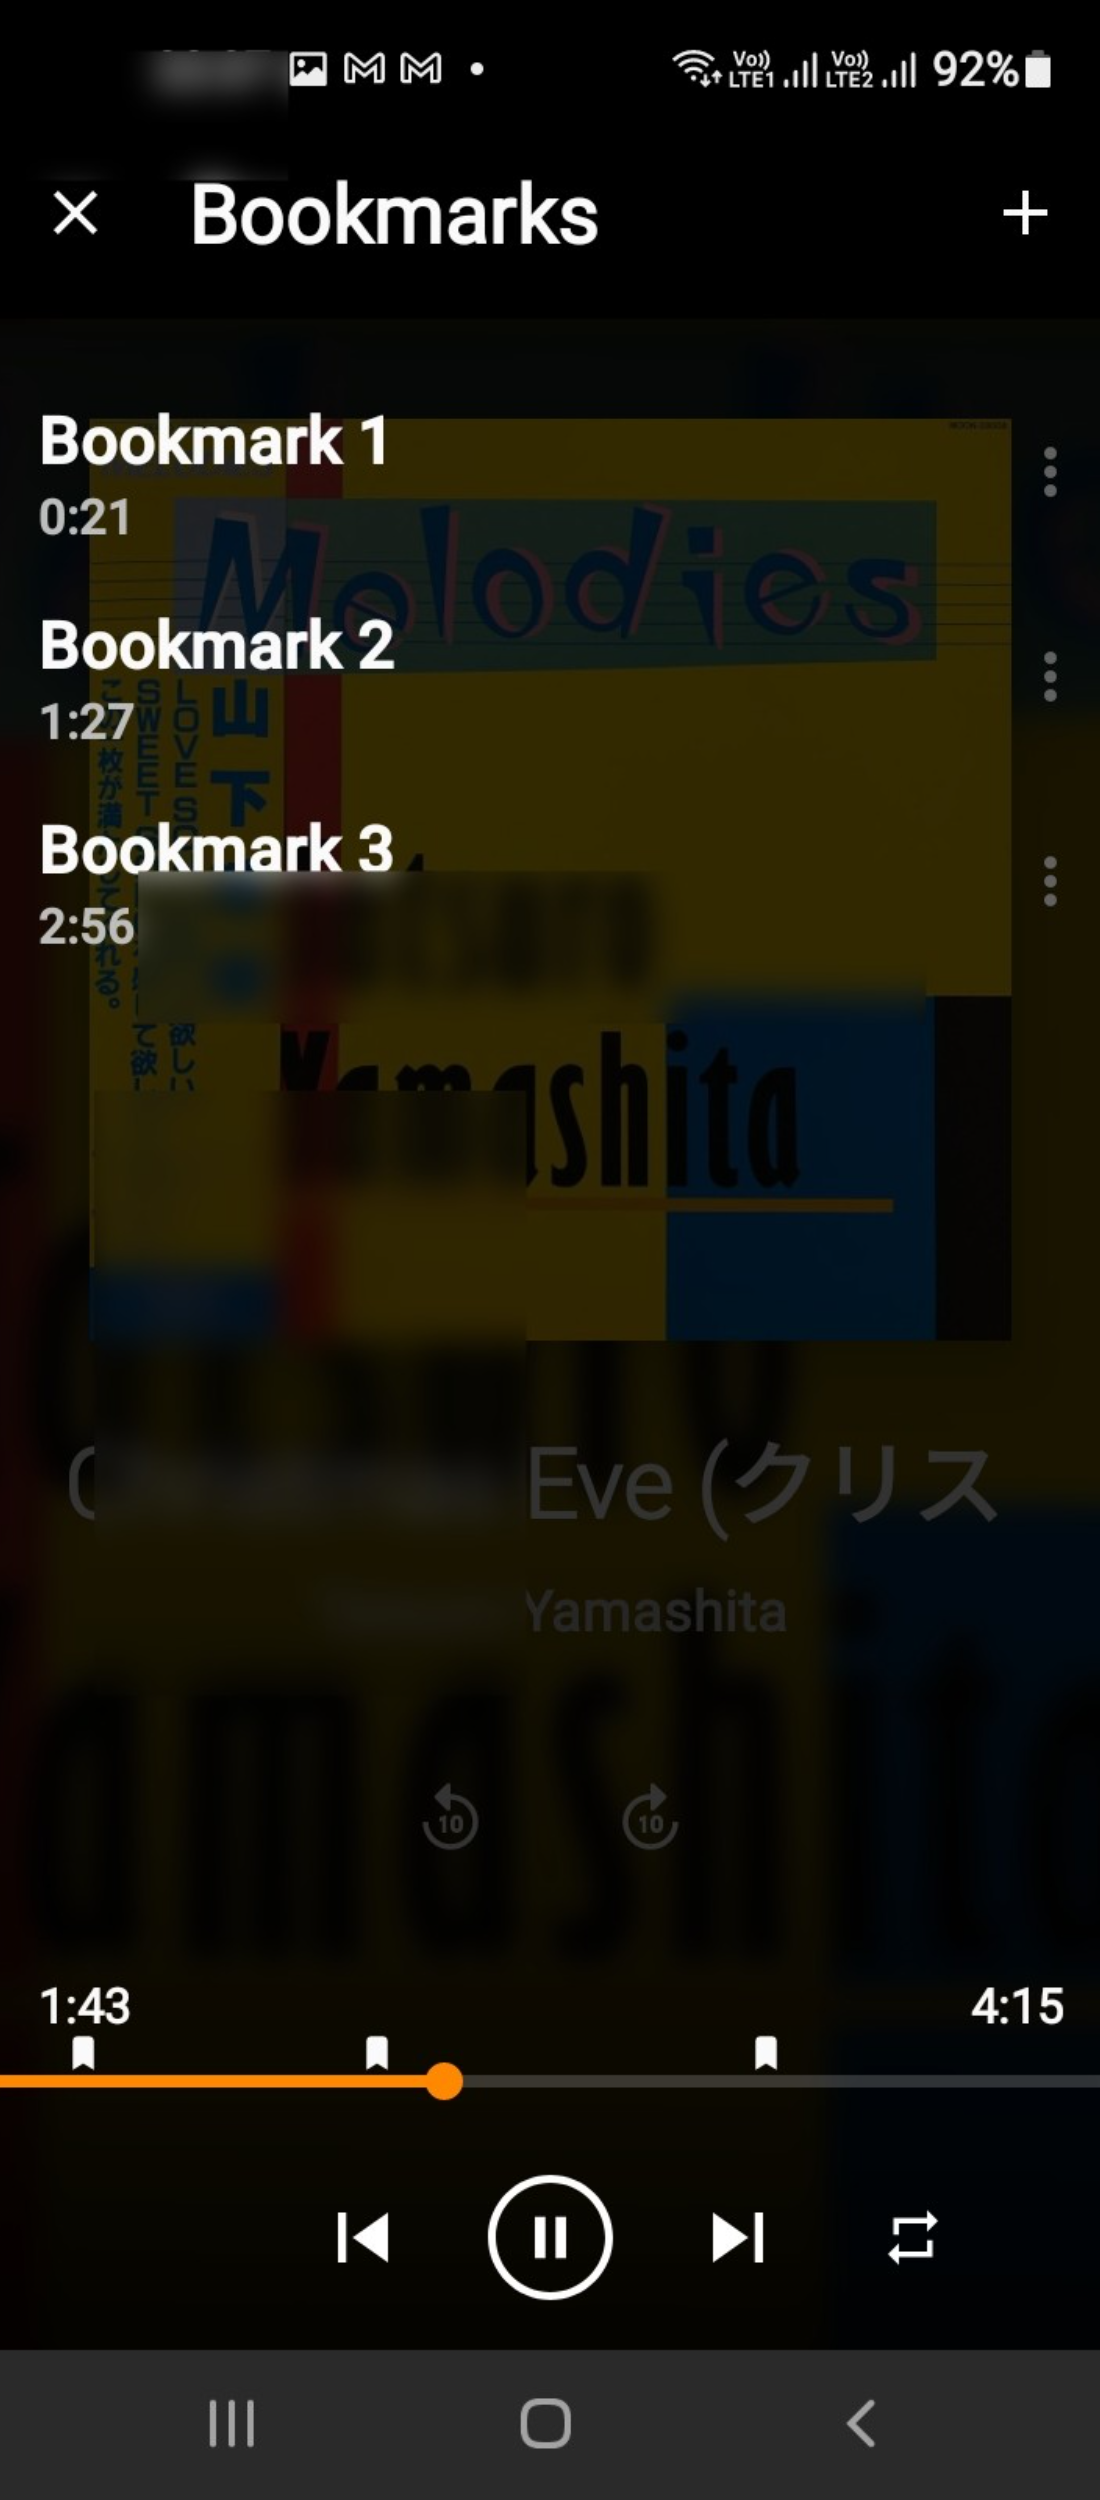 adding bookmarks to media files